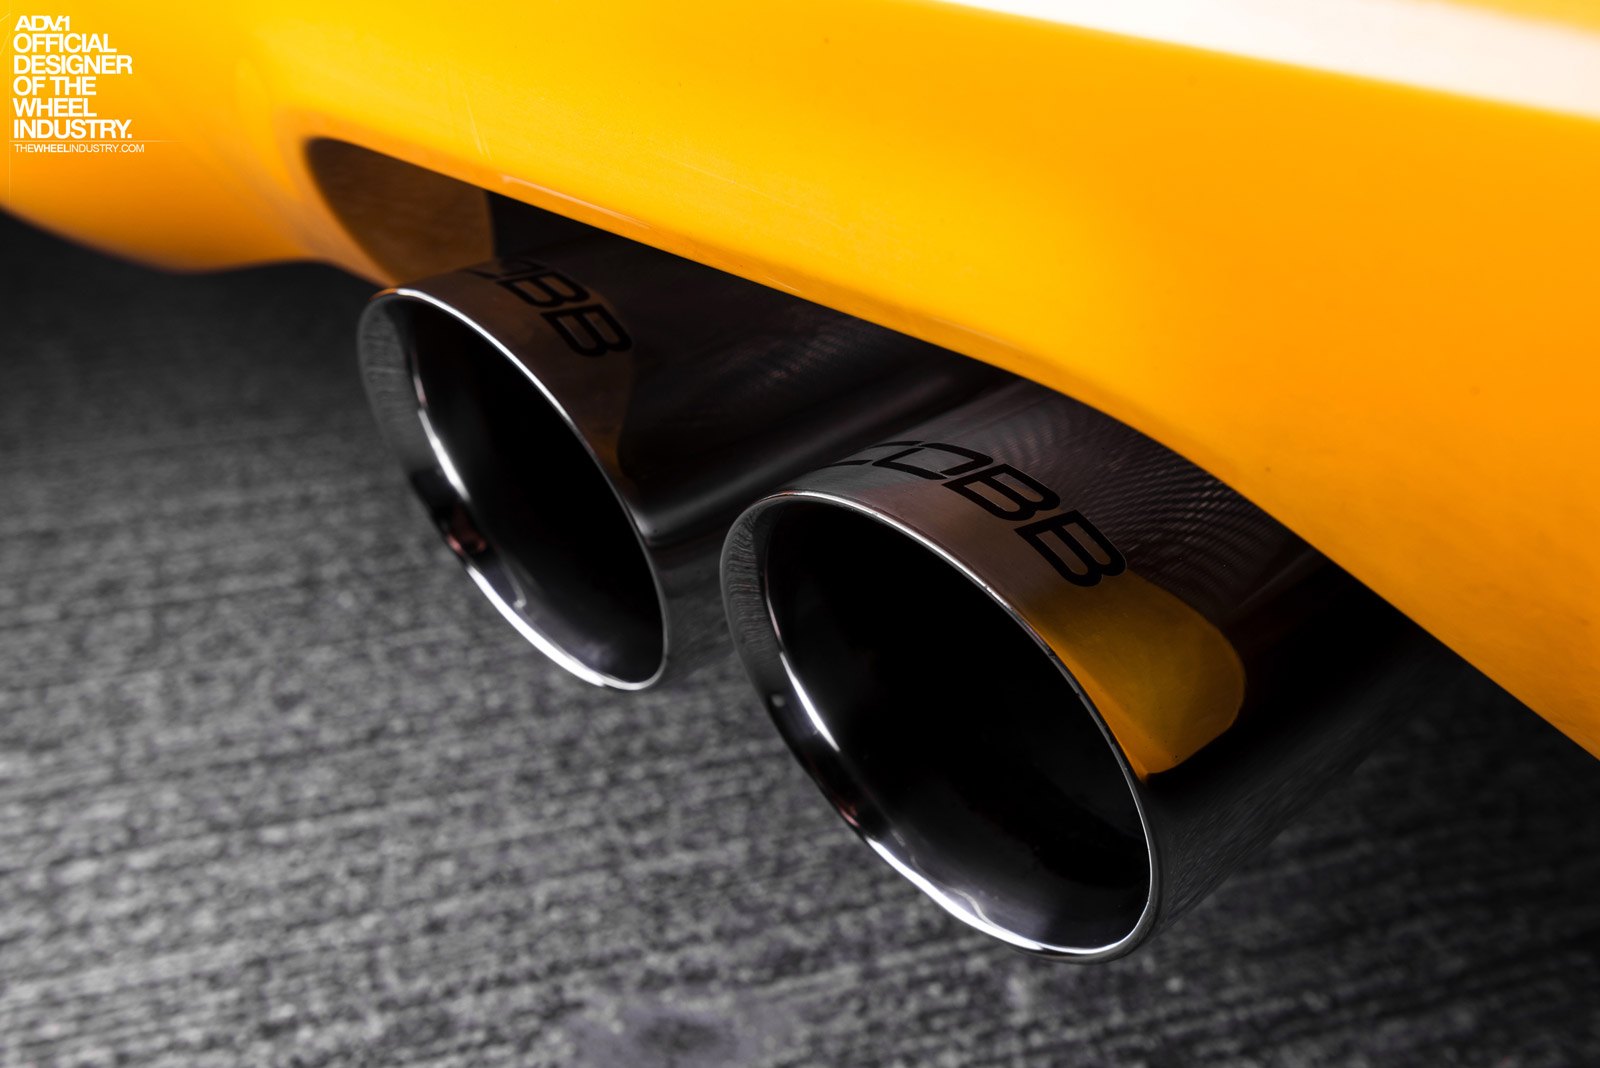 Cobb Exhaust System on Yellow Matte Ford Fiesta - Photo by ADV.1